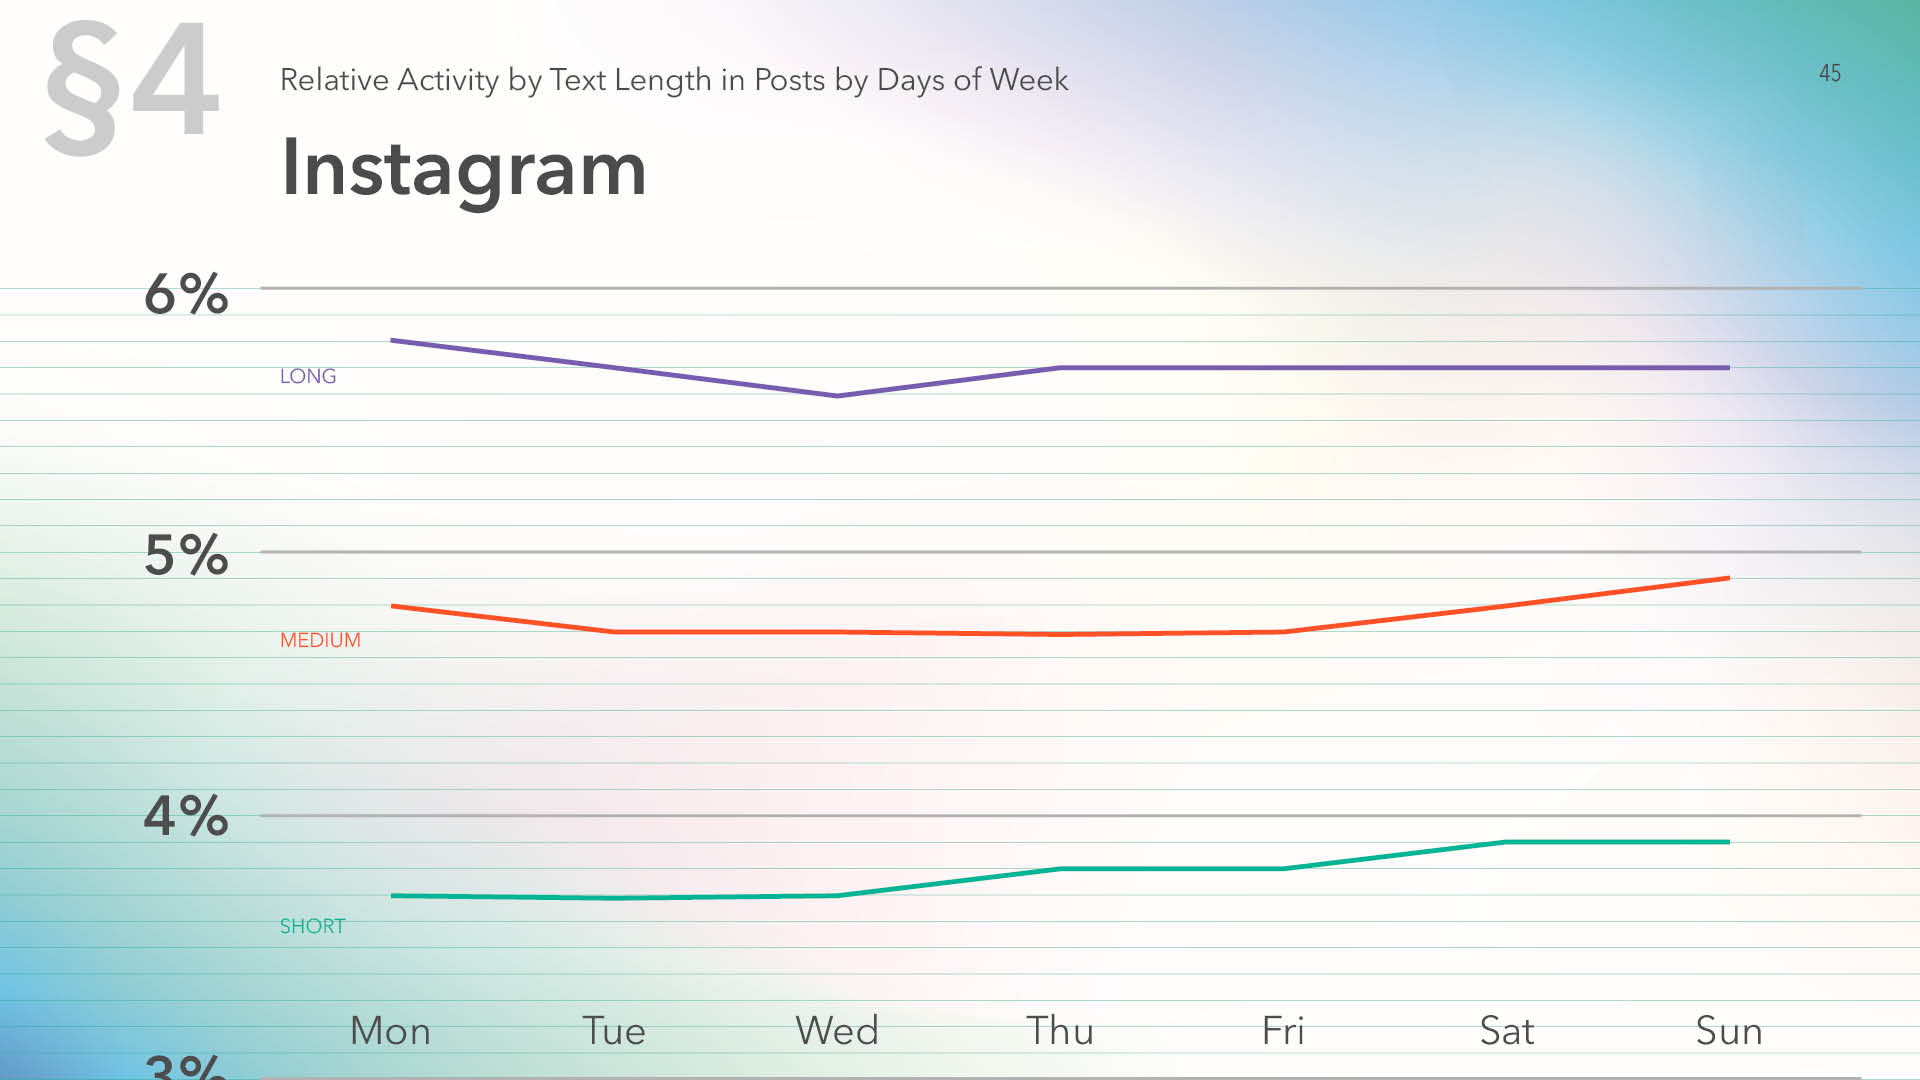 Relative activity on Instagram by text length in posts by days of week, 2019